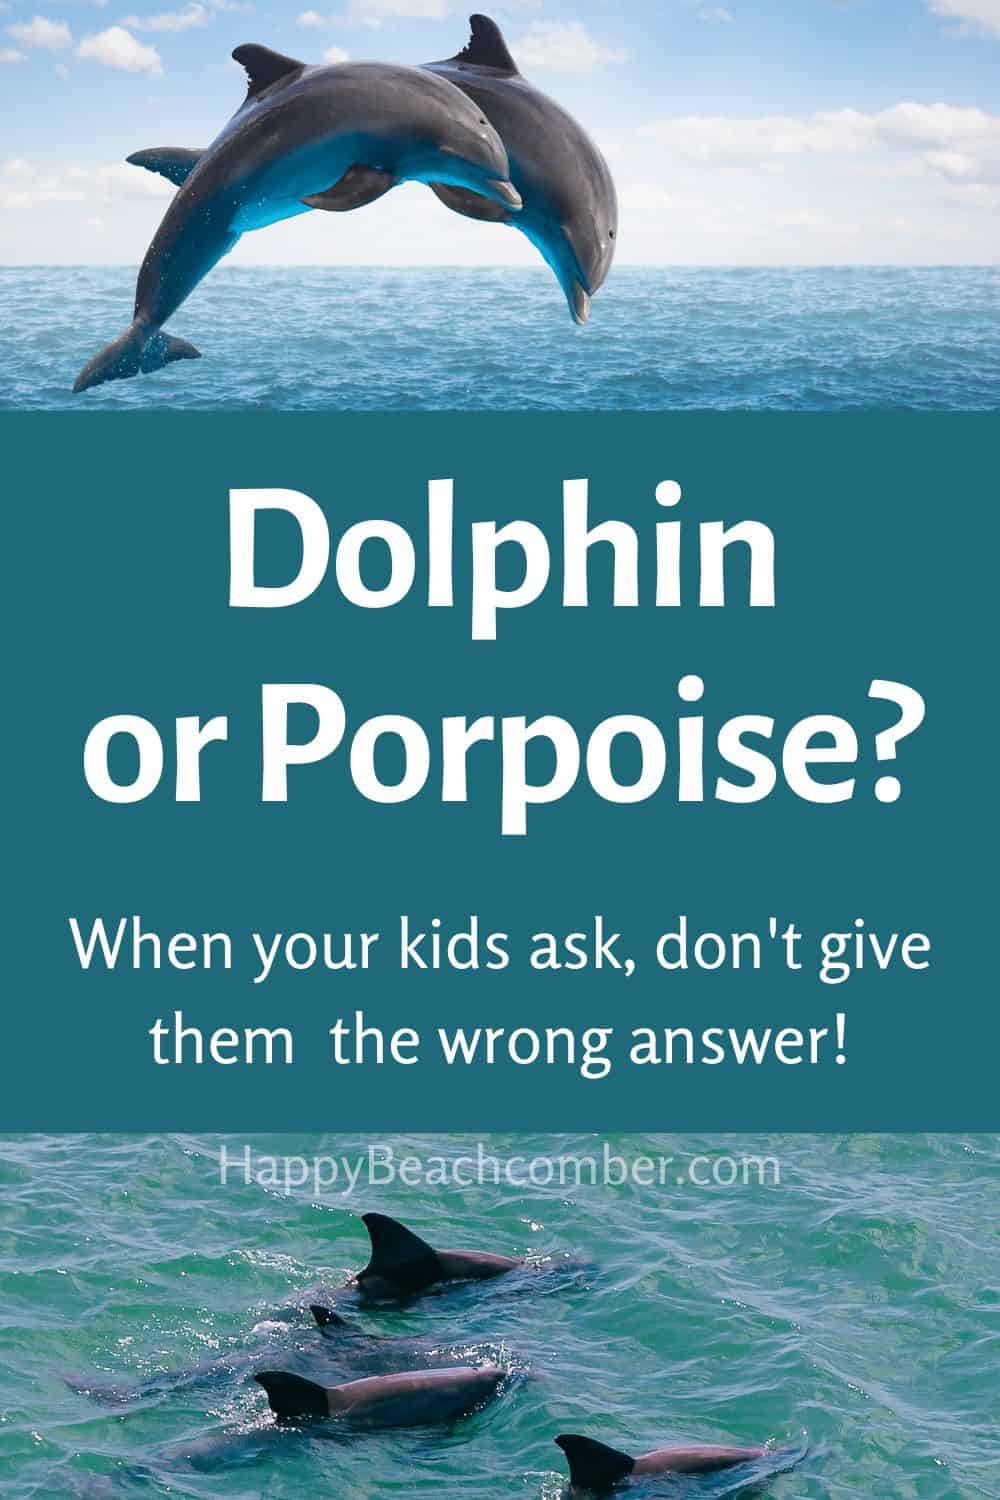 Dolphin or porpoise? When your kids ask, don't give them the wrong answer!